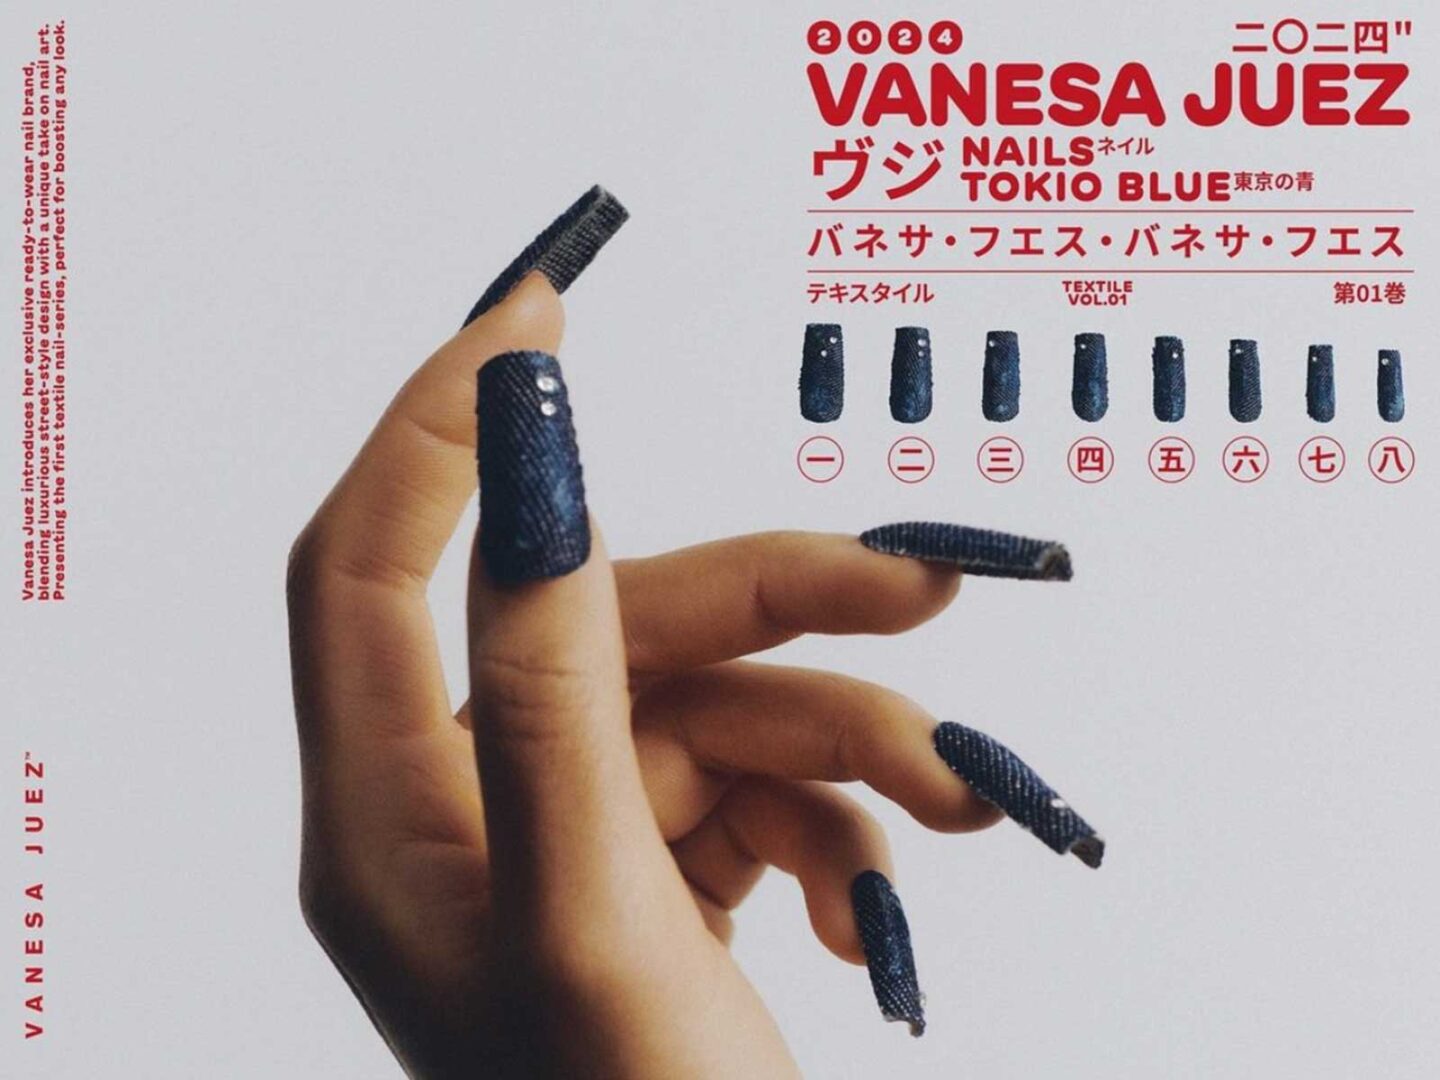 Vanesa Juez launches exclusive ready-to-wear nail brand